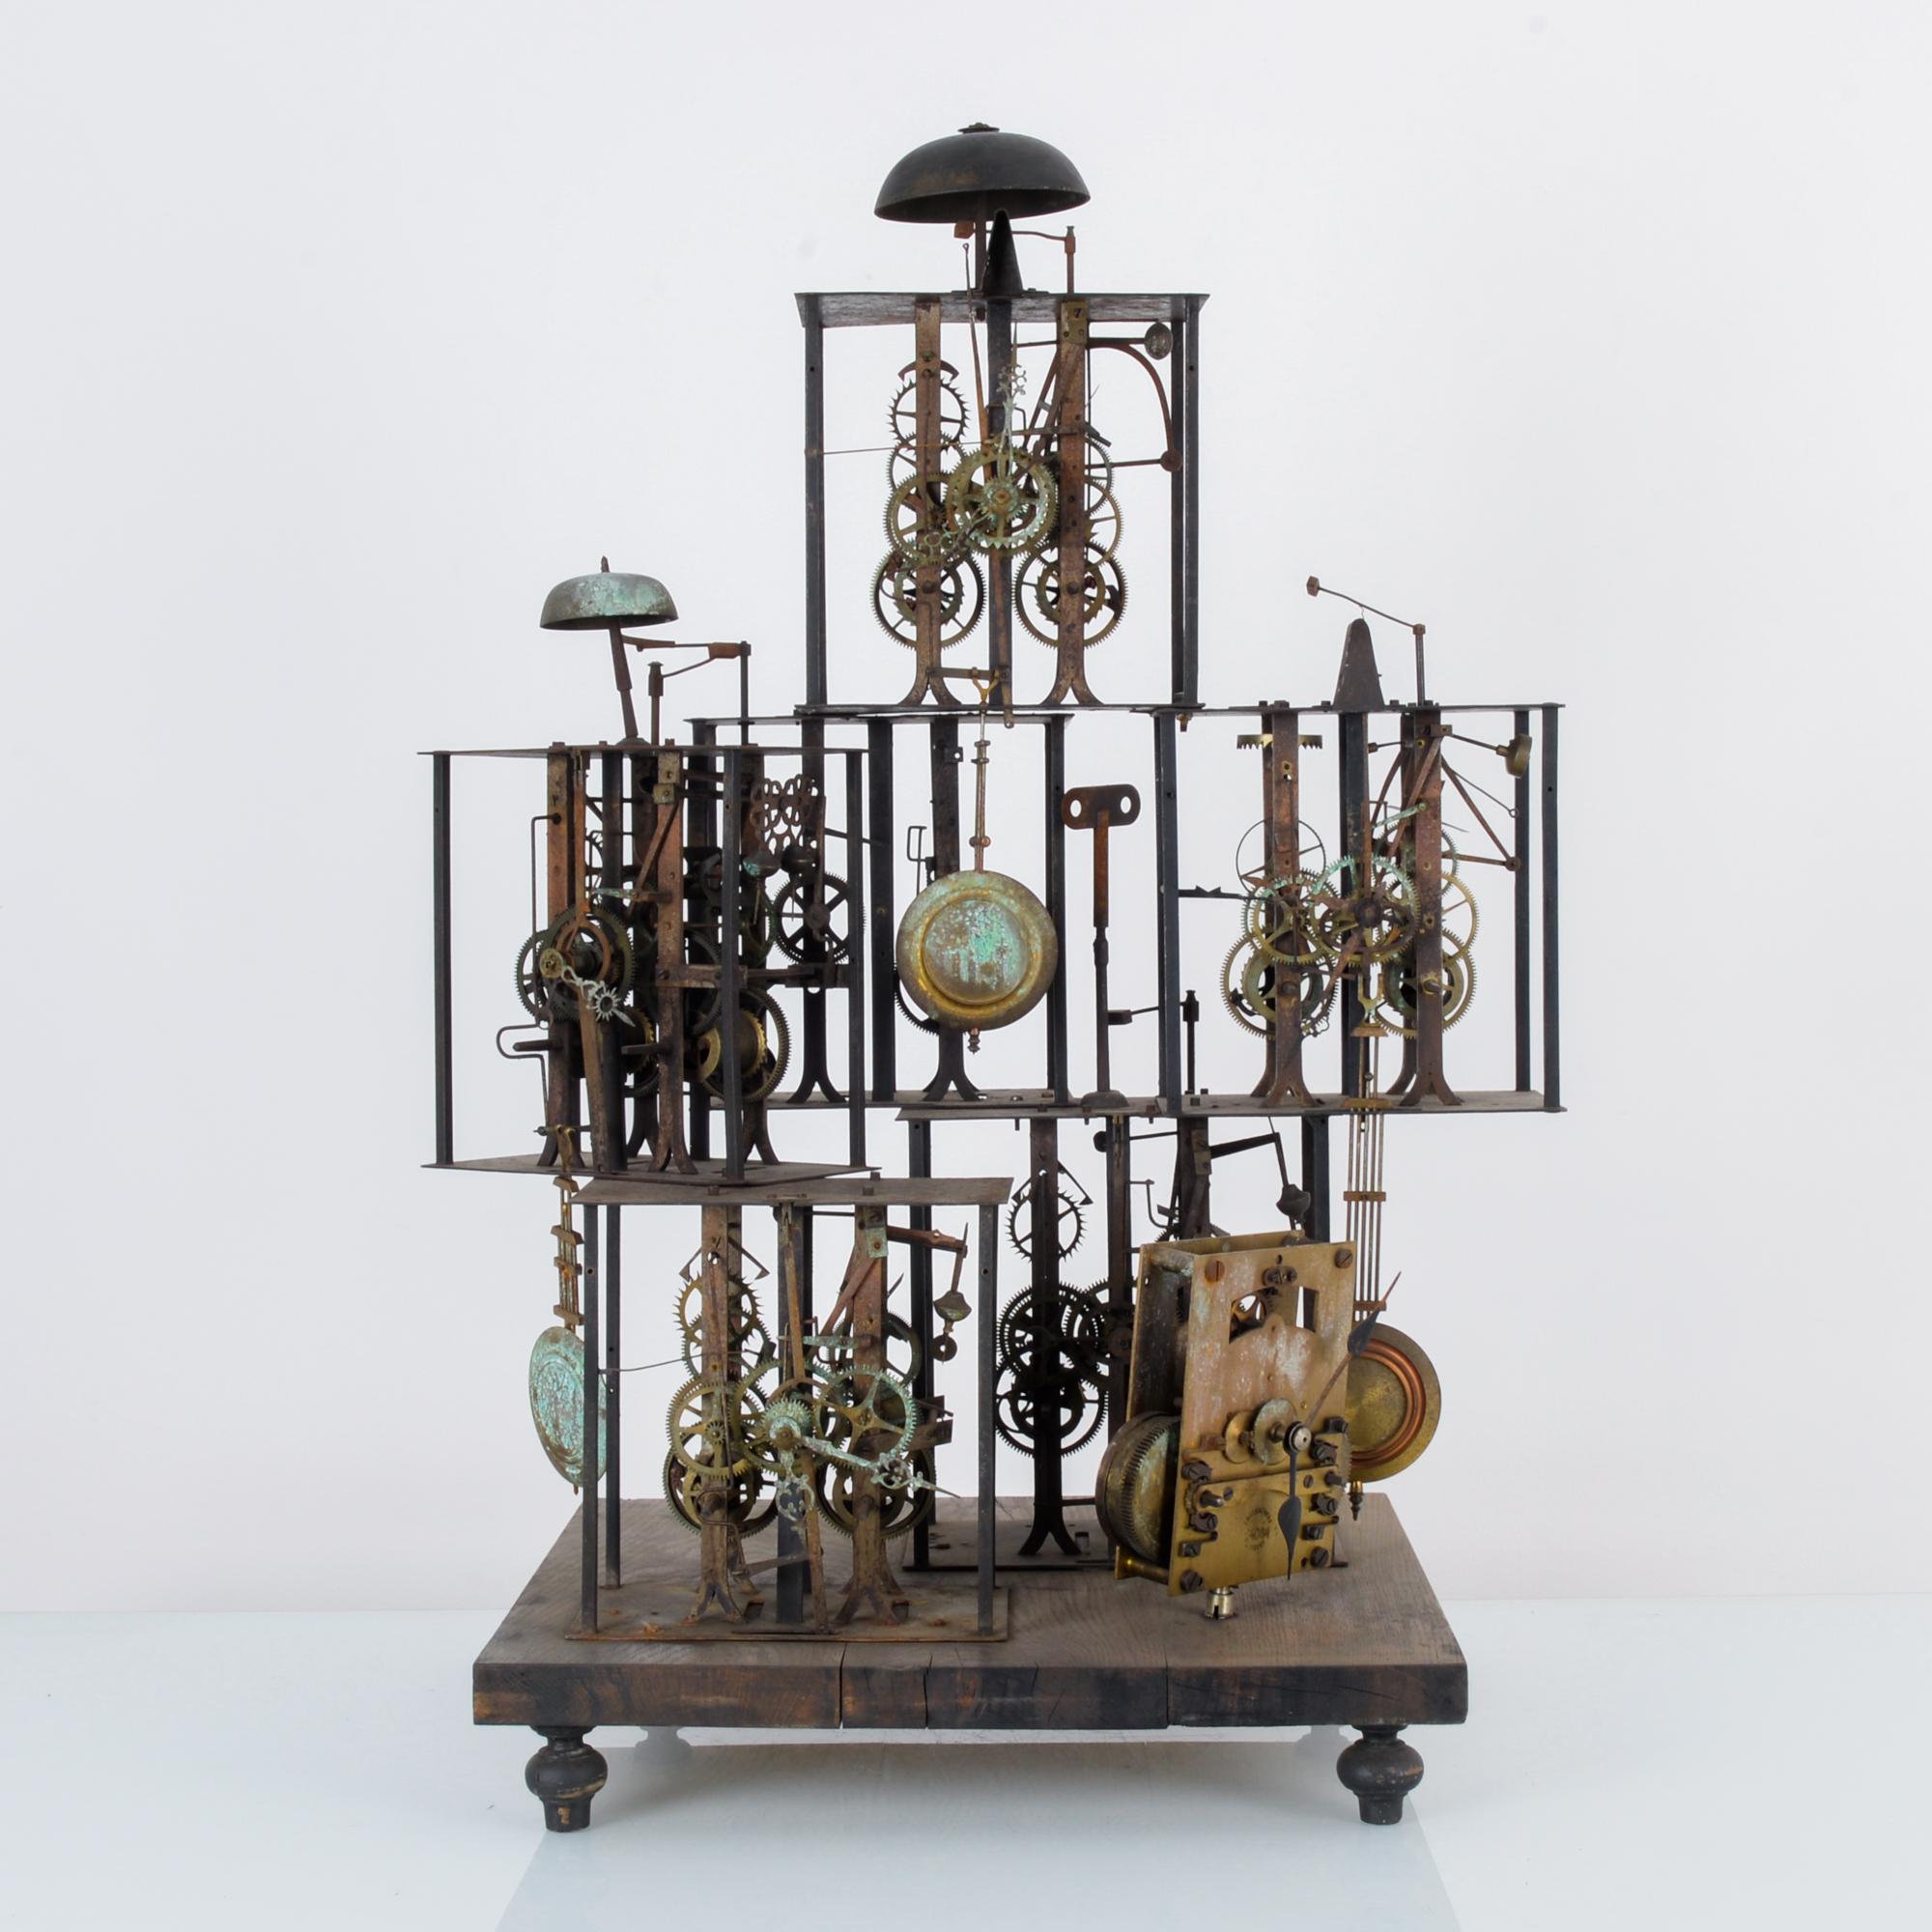 A metal clock sculpture from France, assembled from 19th century clock mechanisms. This curious assemblage rests on a wooden plinth supported by four ball feet. A dozen plus clock skeletons welded into a steampunk monument to Time stood still. A